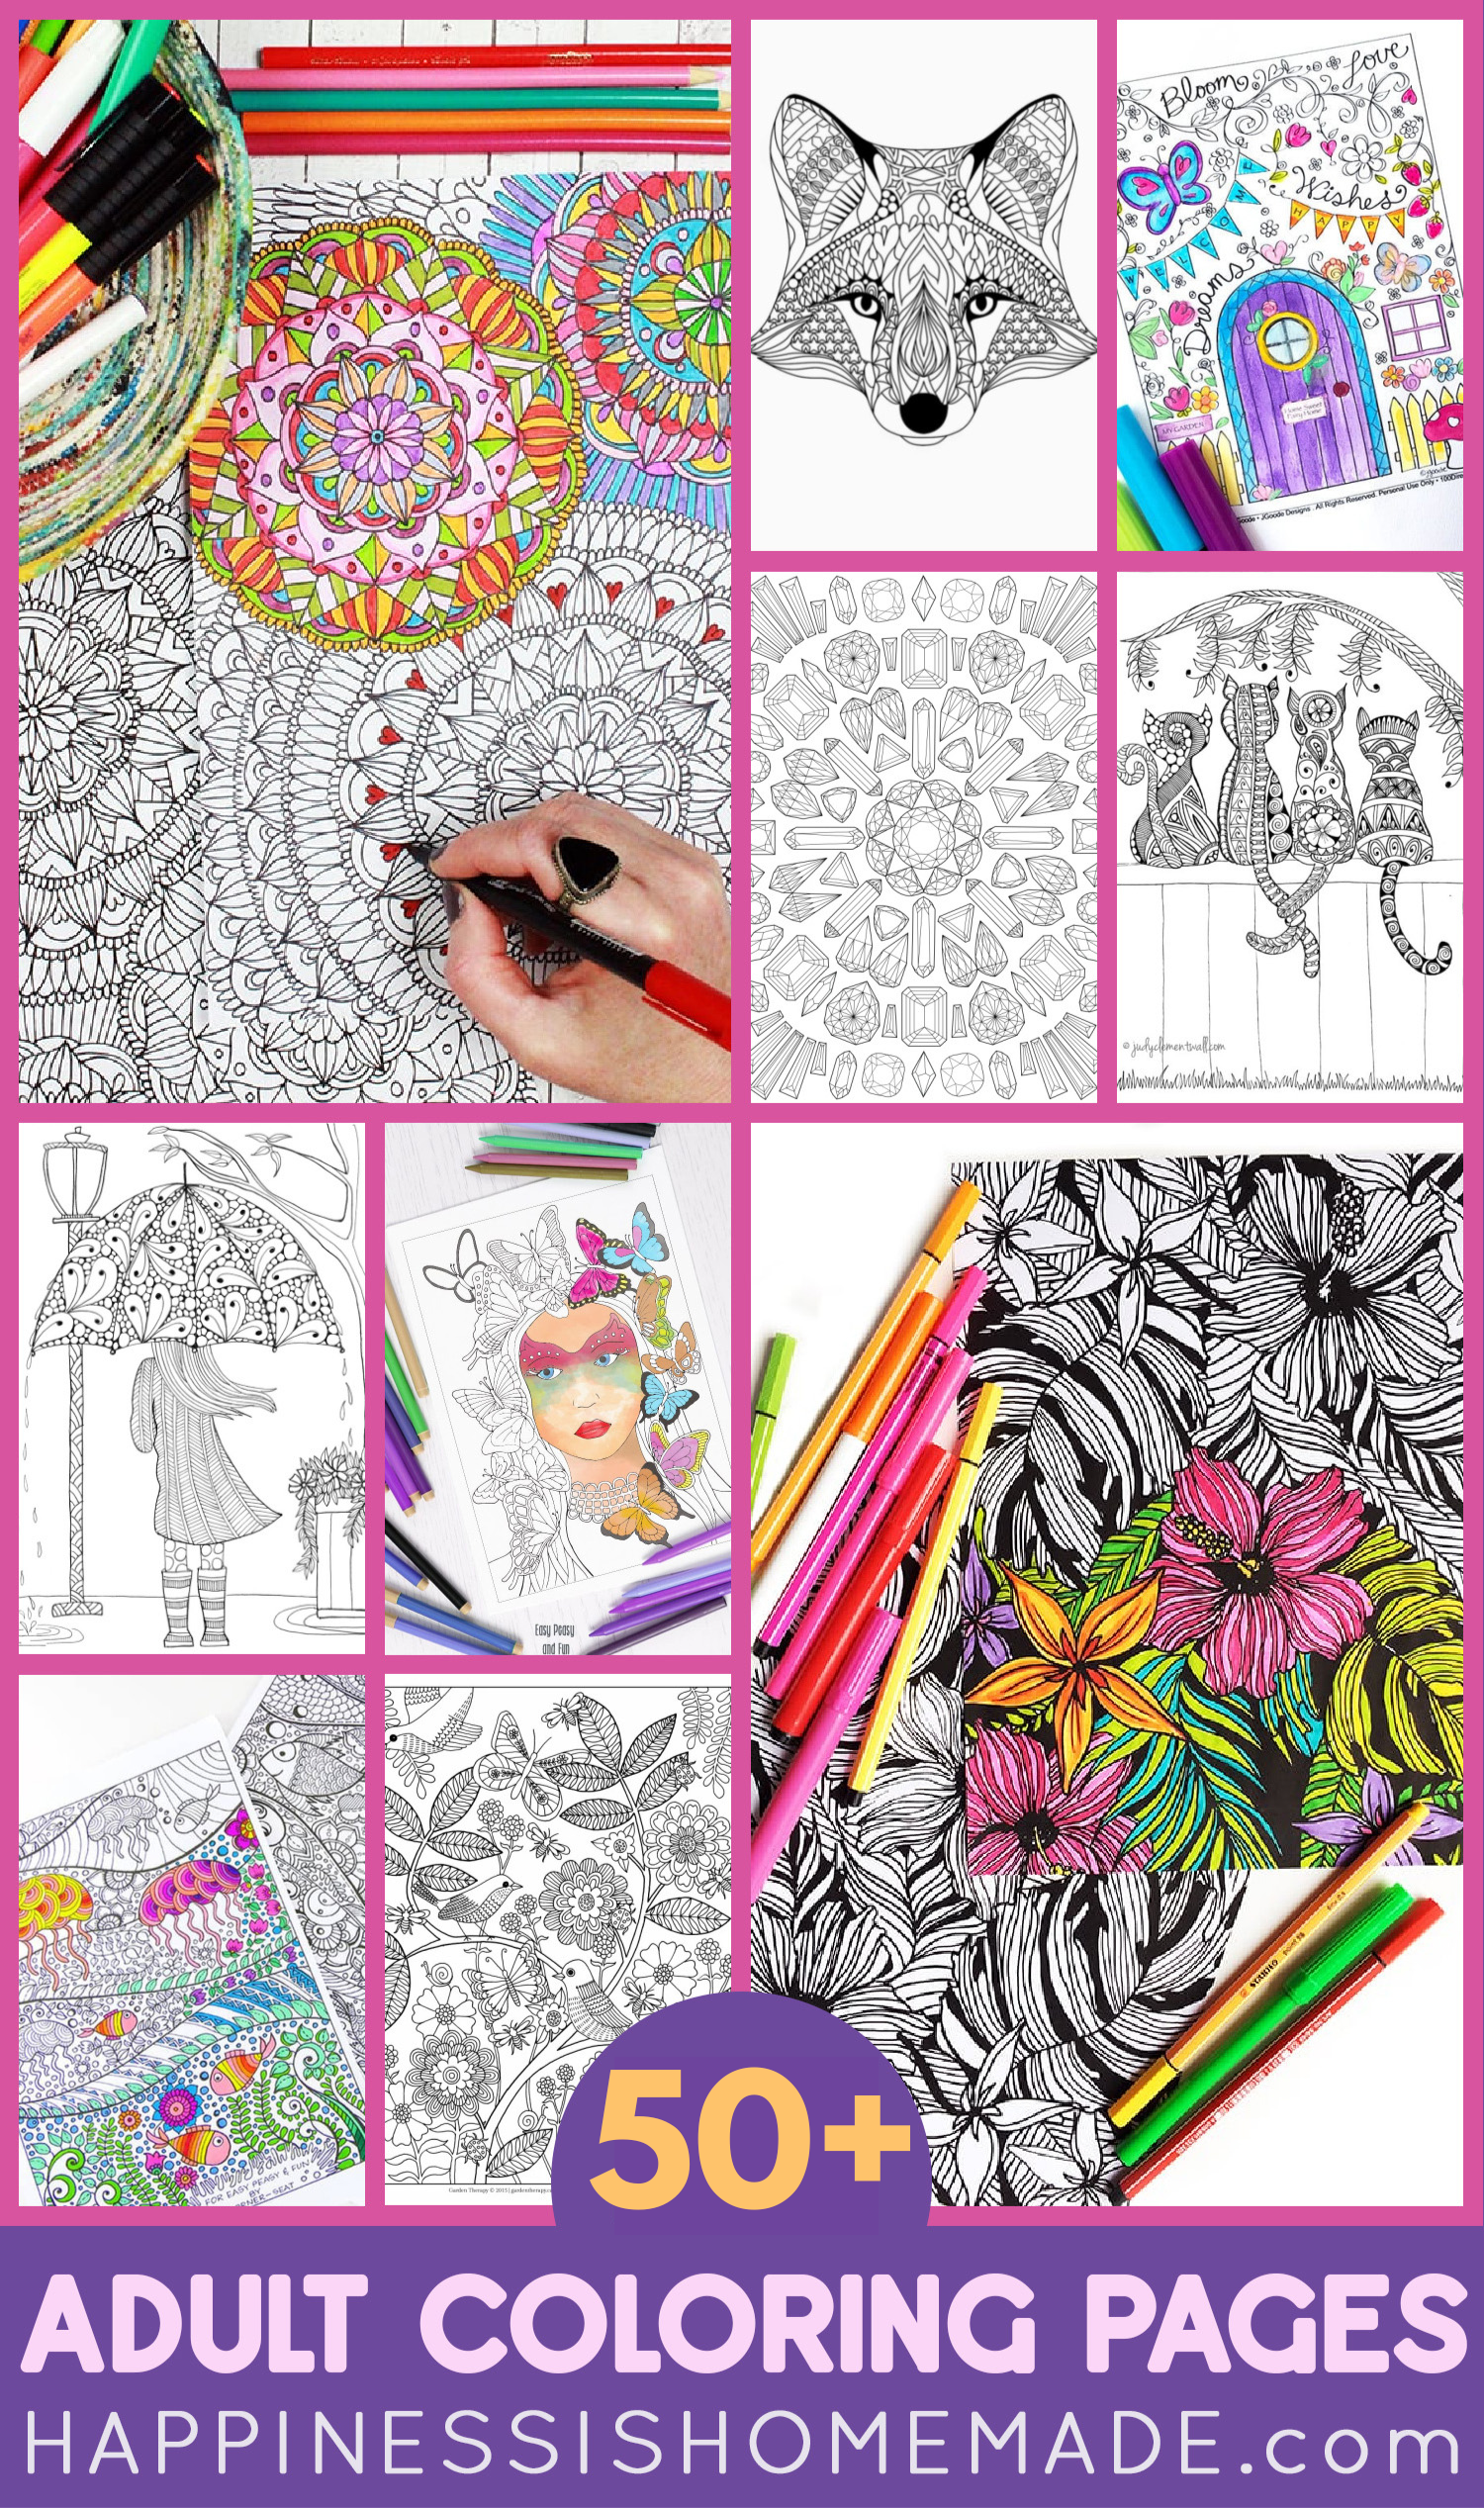 https://www.happinessishomemade.net/wp-content/uploads/2021/10/50-Adult-Coloring-Pages-1.png